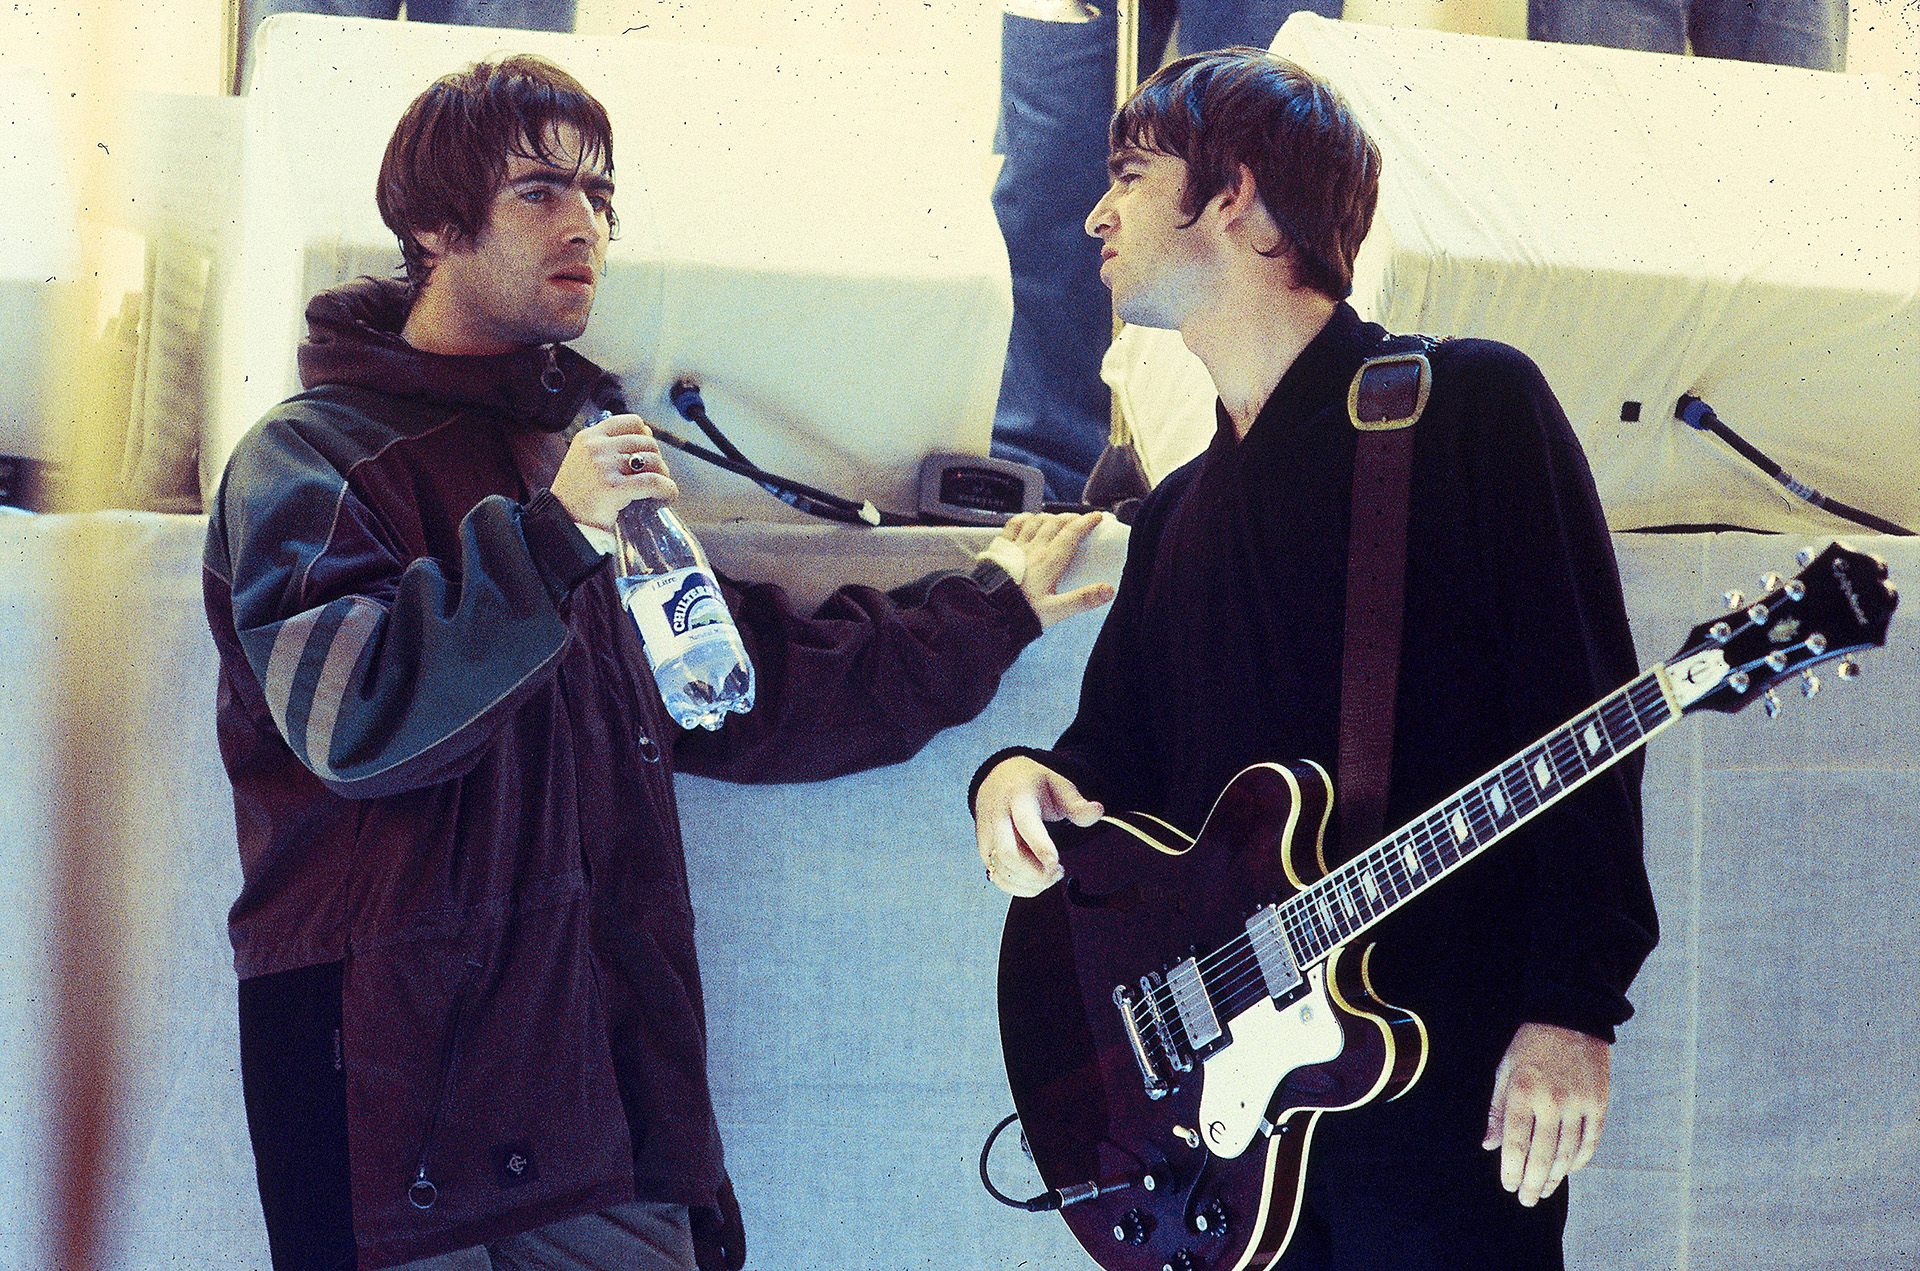 Liam Gallagher and Noel Gallagher, co-founders of Oasis, are one of the most successful and rocky partnerships in British music history (Photo by Des Willie/Redferns)